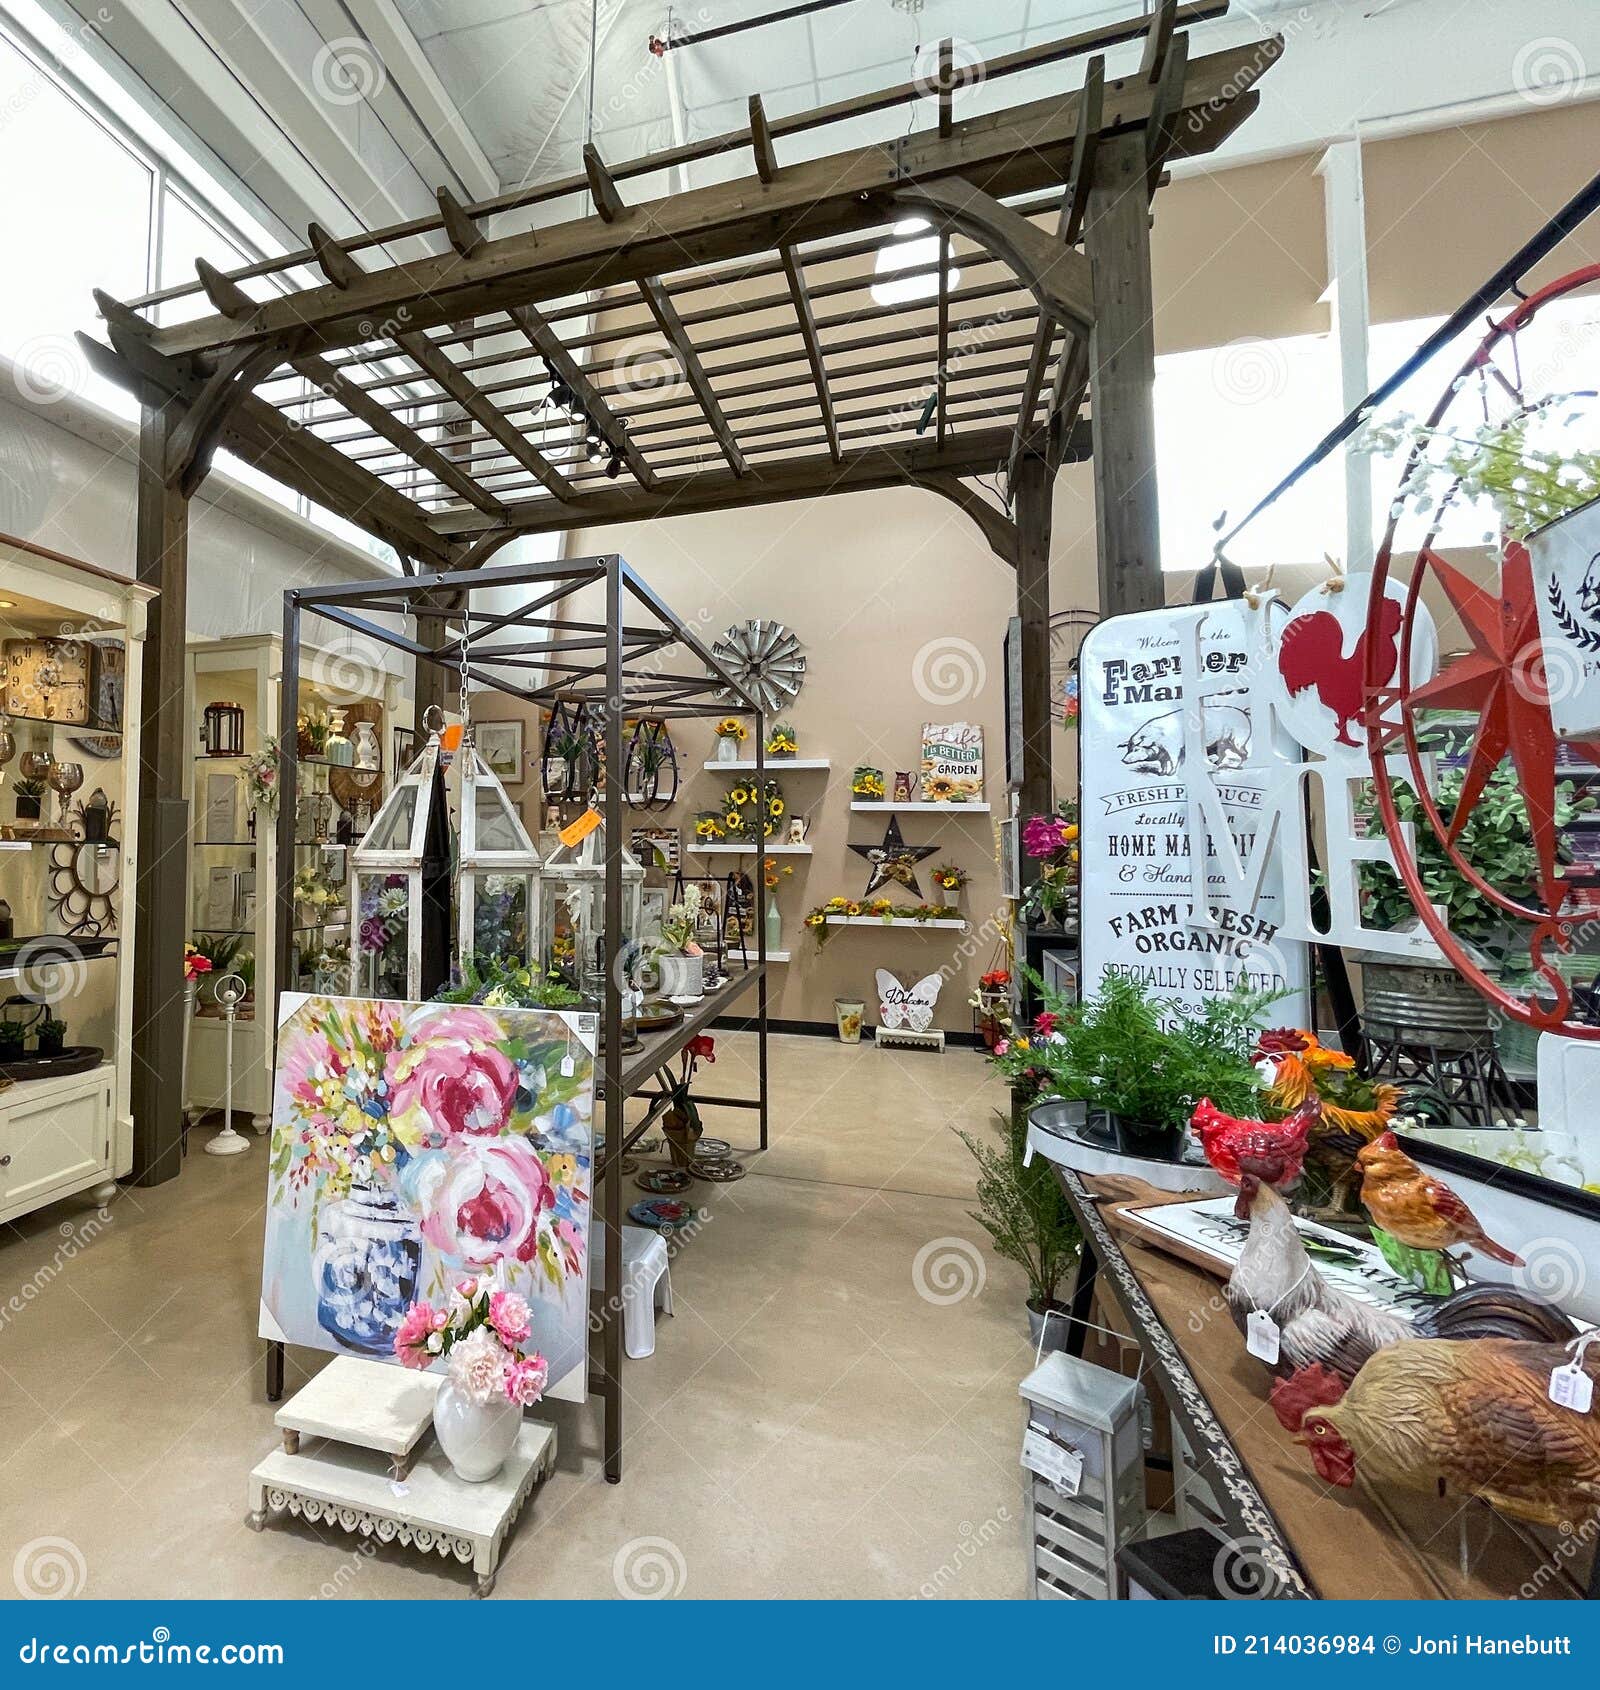 Decor Inspiration: Our New Summer Store Displays